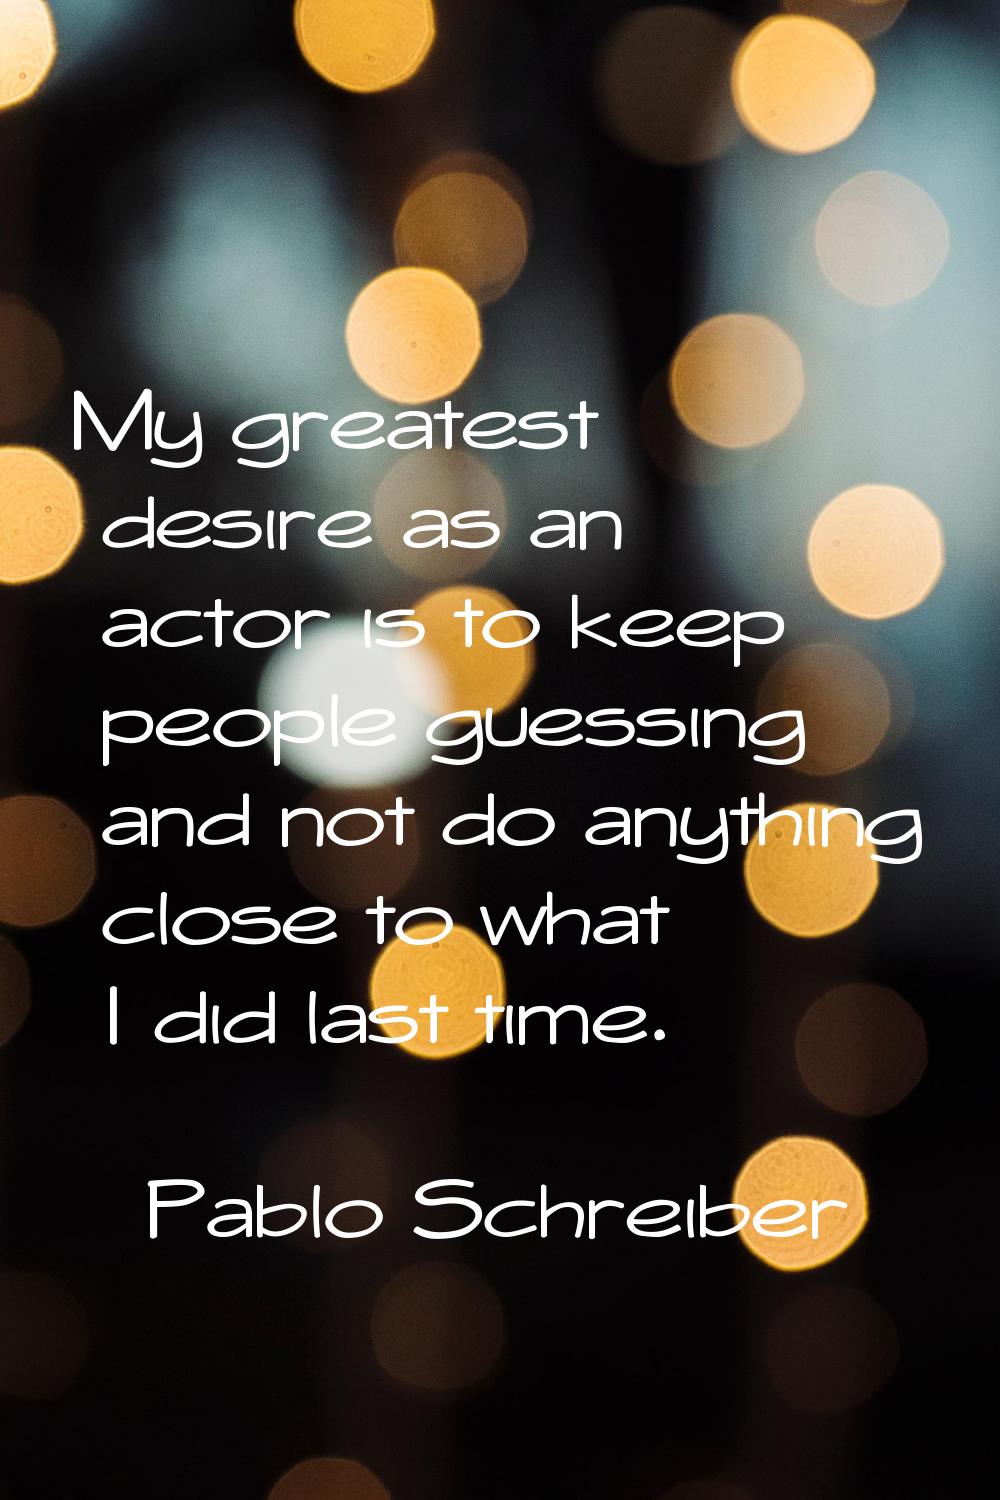 My greatest desire as an actor is to keep people guessing and not do anything close to what I did l